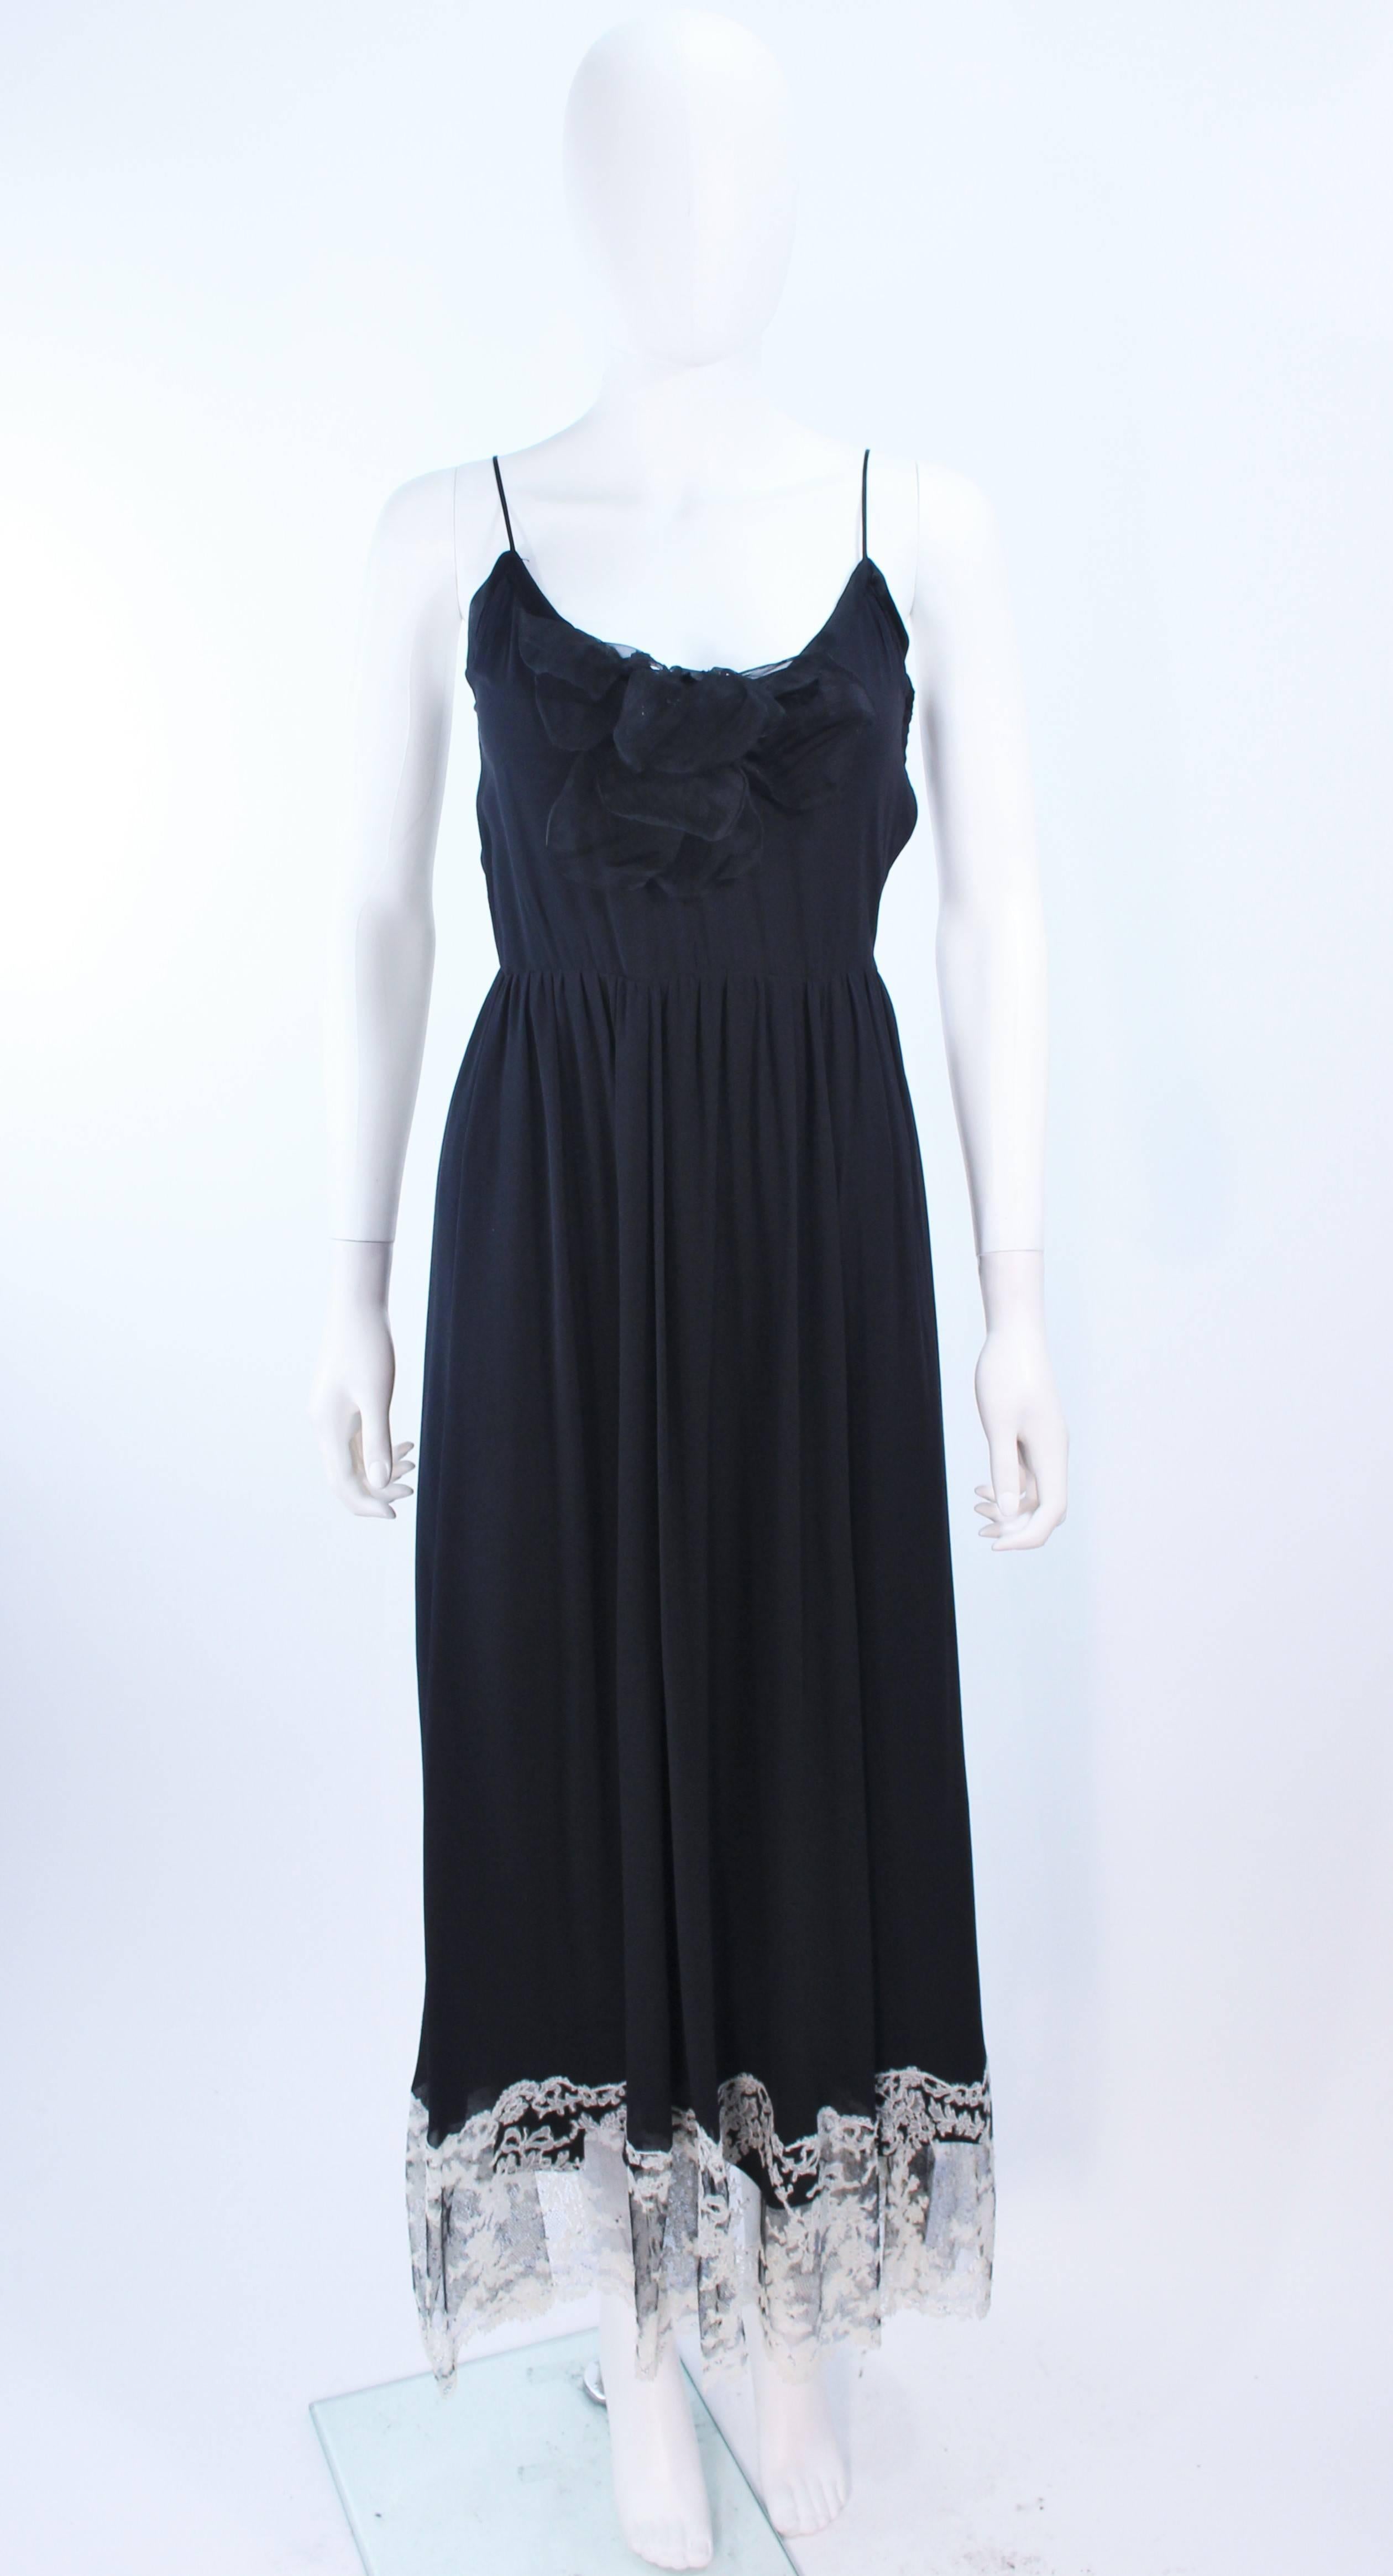 This Maggy Reeves cocktail dress is composed of a black silk chiffon. Features a center front floral applique and lace trim. There is a side zipper closure. In excellent vintage condition.

**Please cross-reference measurements for personal